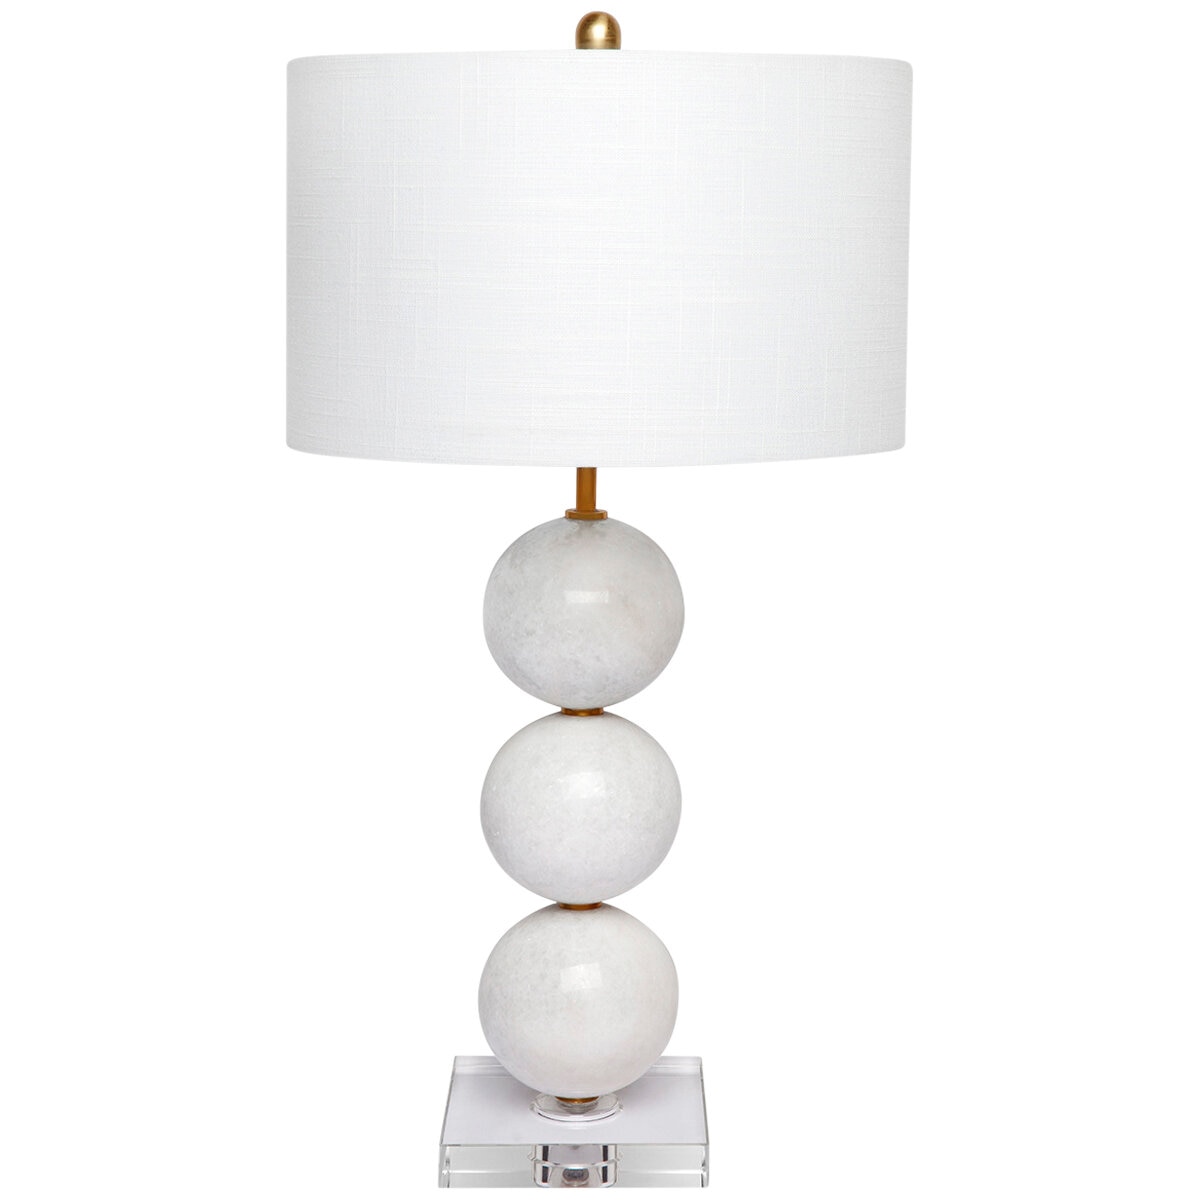 Cafe Lighting and Living Manolo Marble Table Lamp, White/